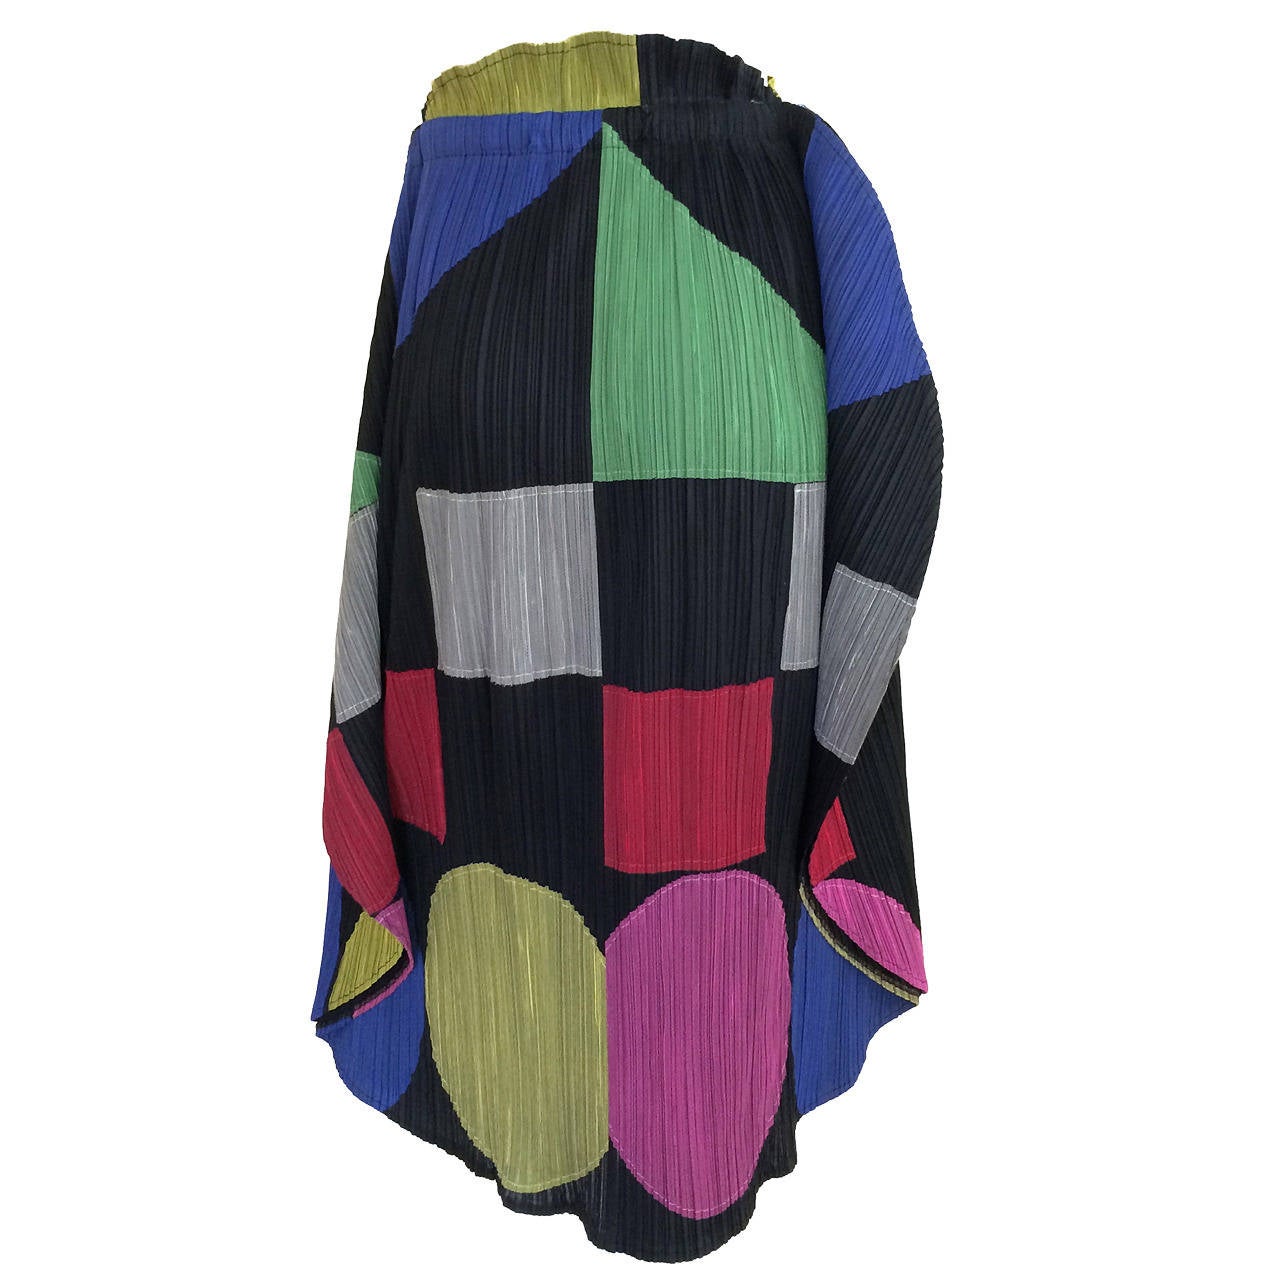  Issey Miyake Pleats Please Sculptural Color Block Skirt / Cape 1990s For Sale